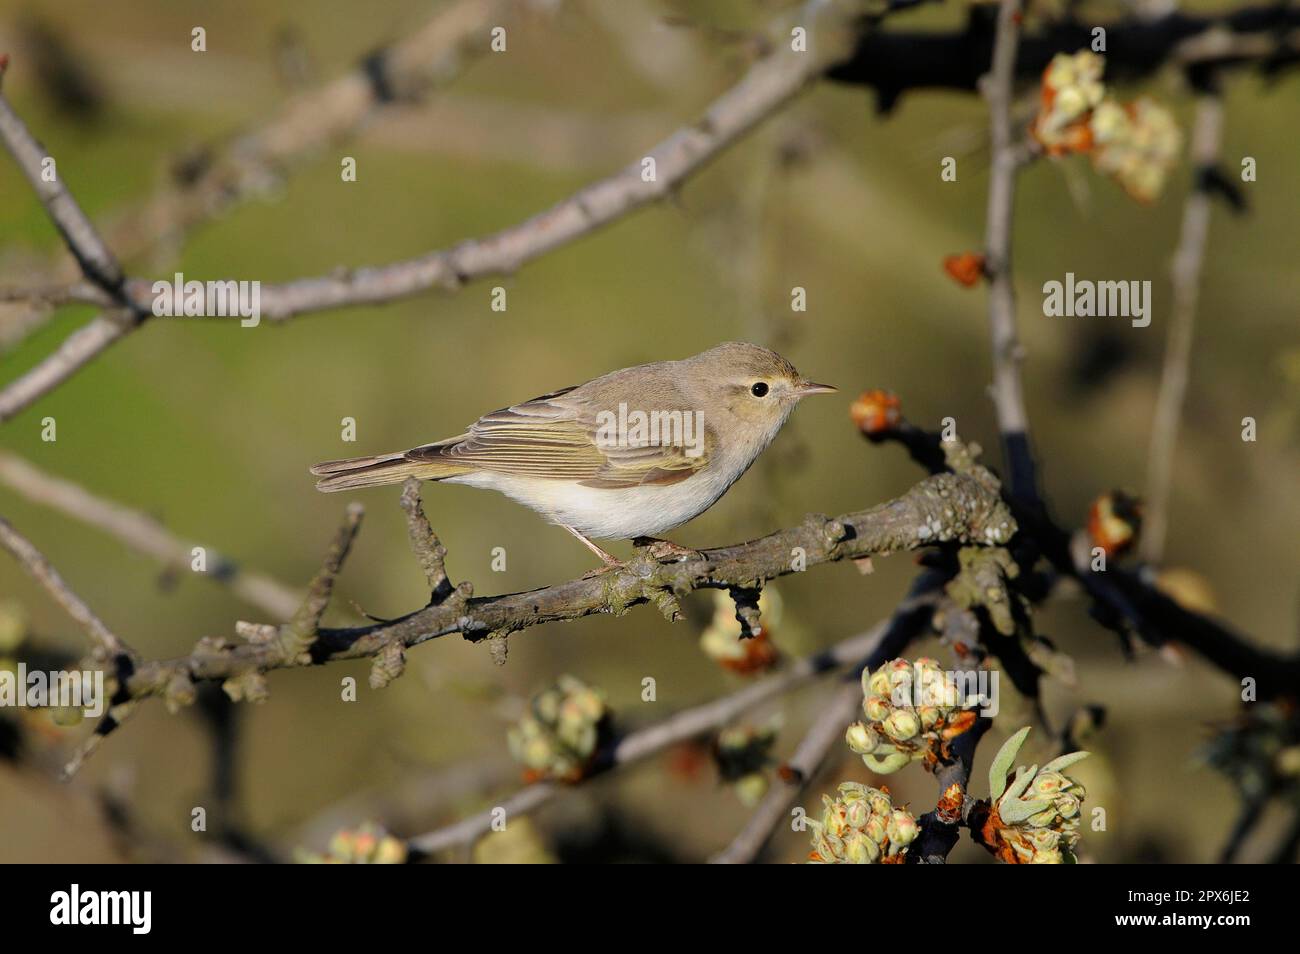 Eastern Bonelli's Warbler (Phylloscopus orientalis) adult, summer plumage, perched on twig with flowerbuds, Lemnos, Greece Stock Photo